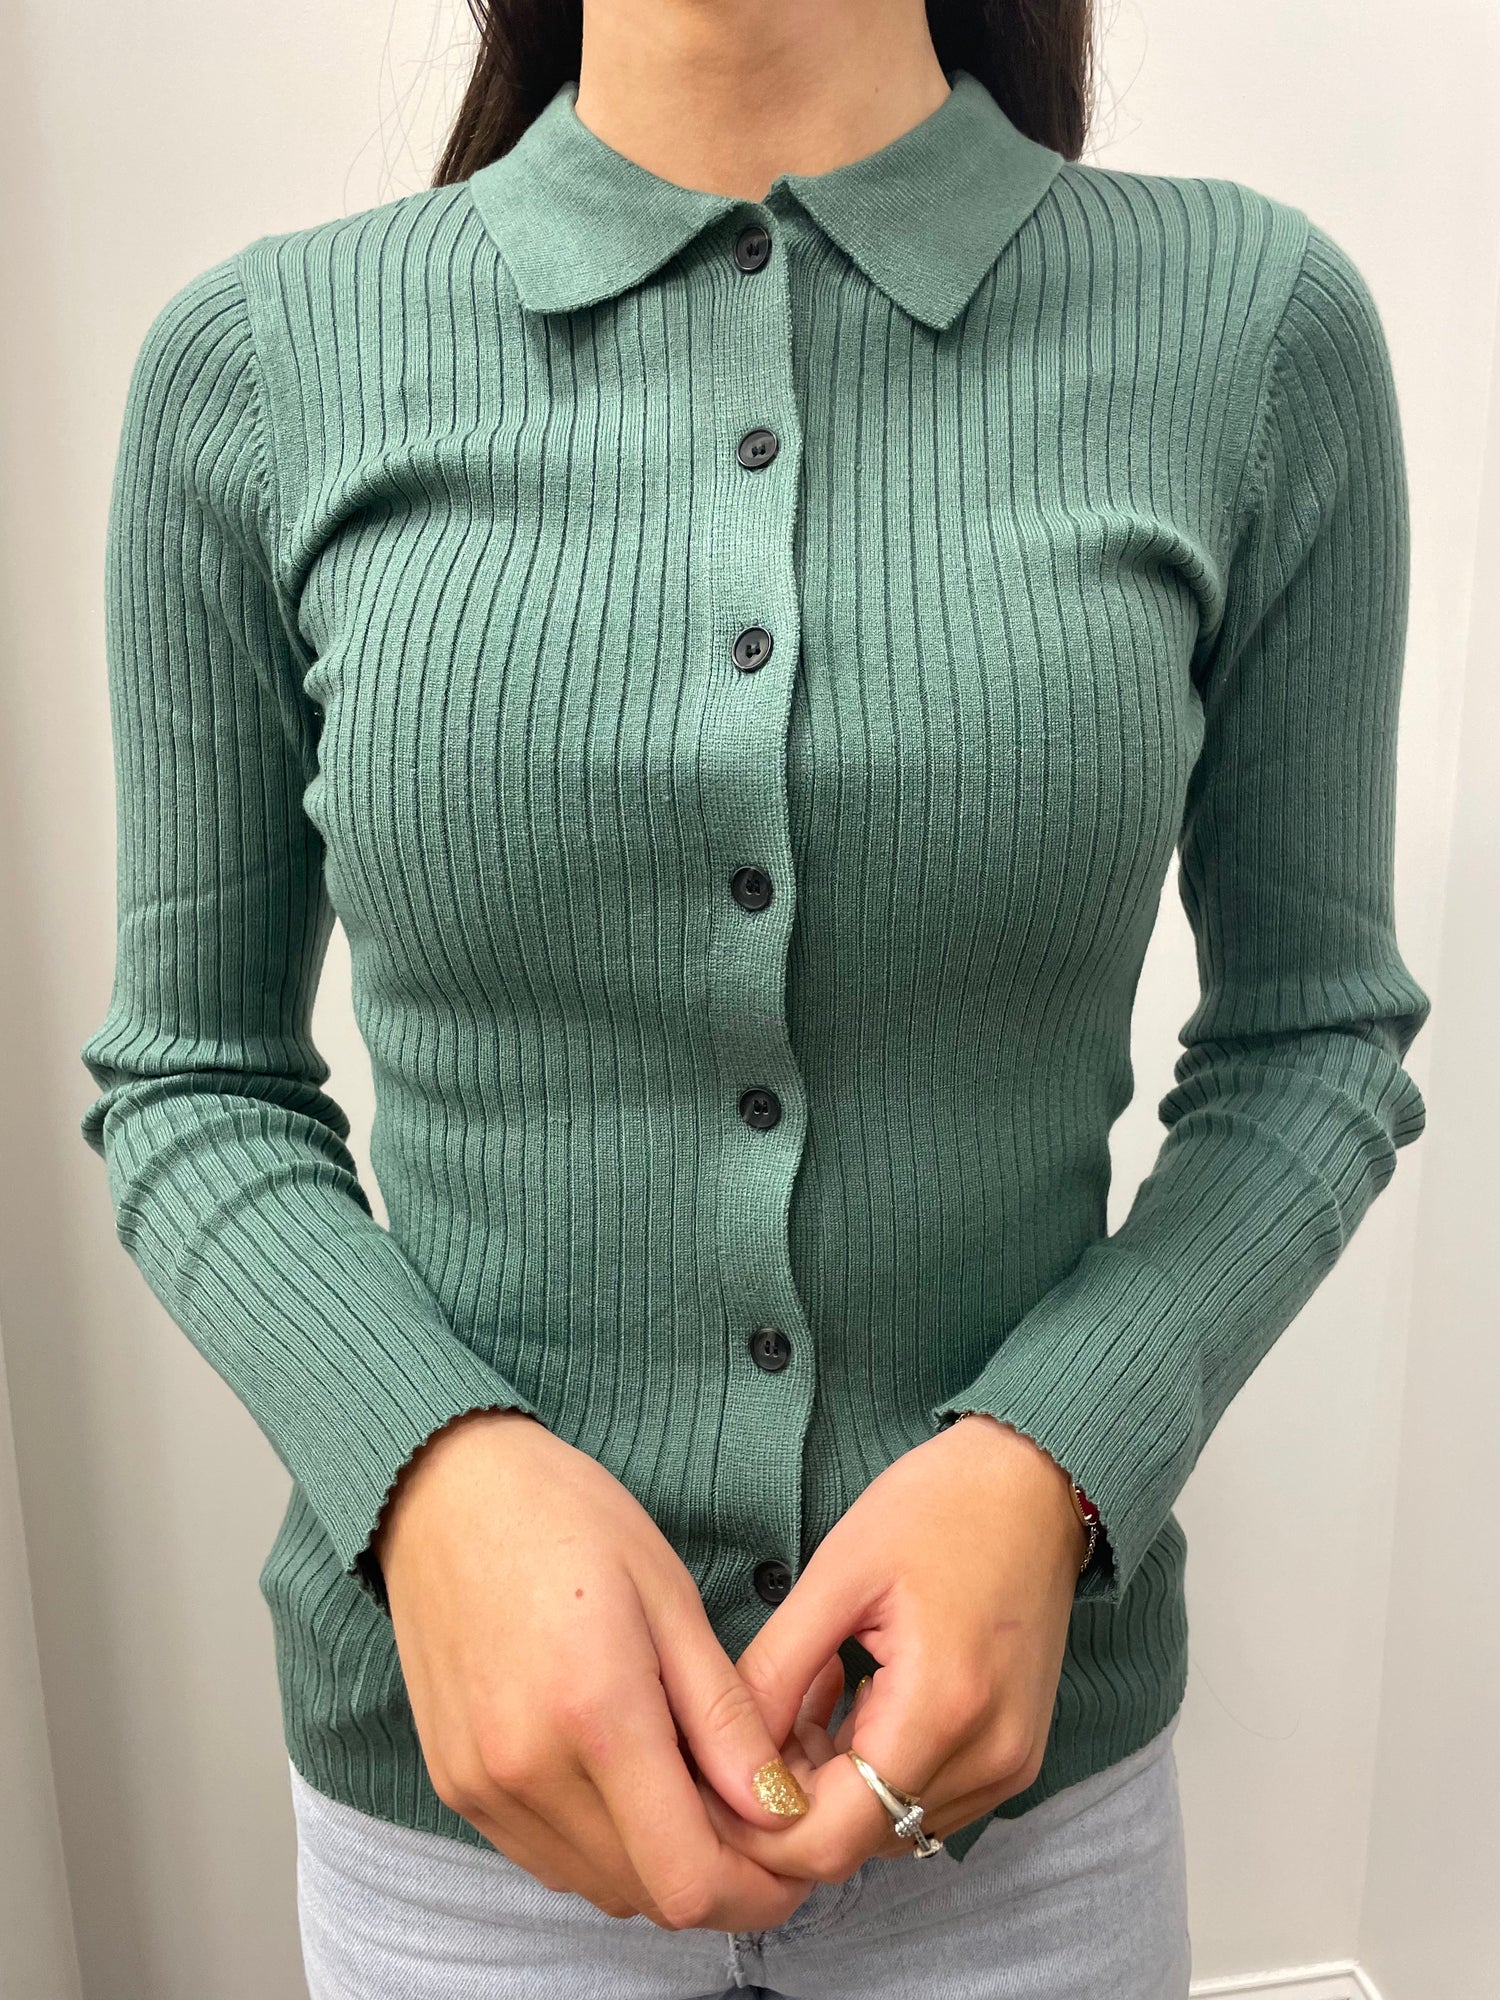 Cali Collared Fitted Cardigan  Collared Neckline Button Up Closure Colors:  Green Fitted Full Length 50% Rayon, 30% Polyester, 20% Nylon